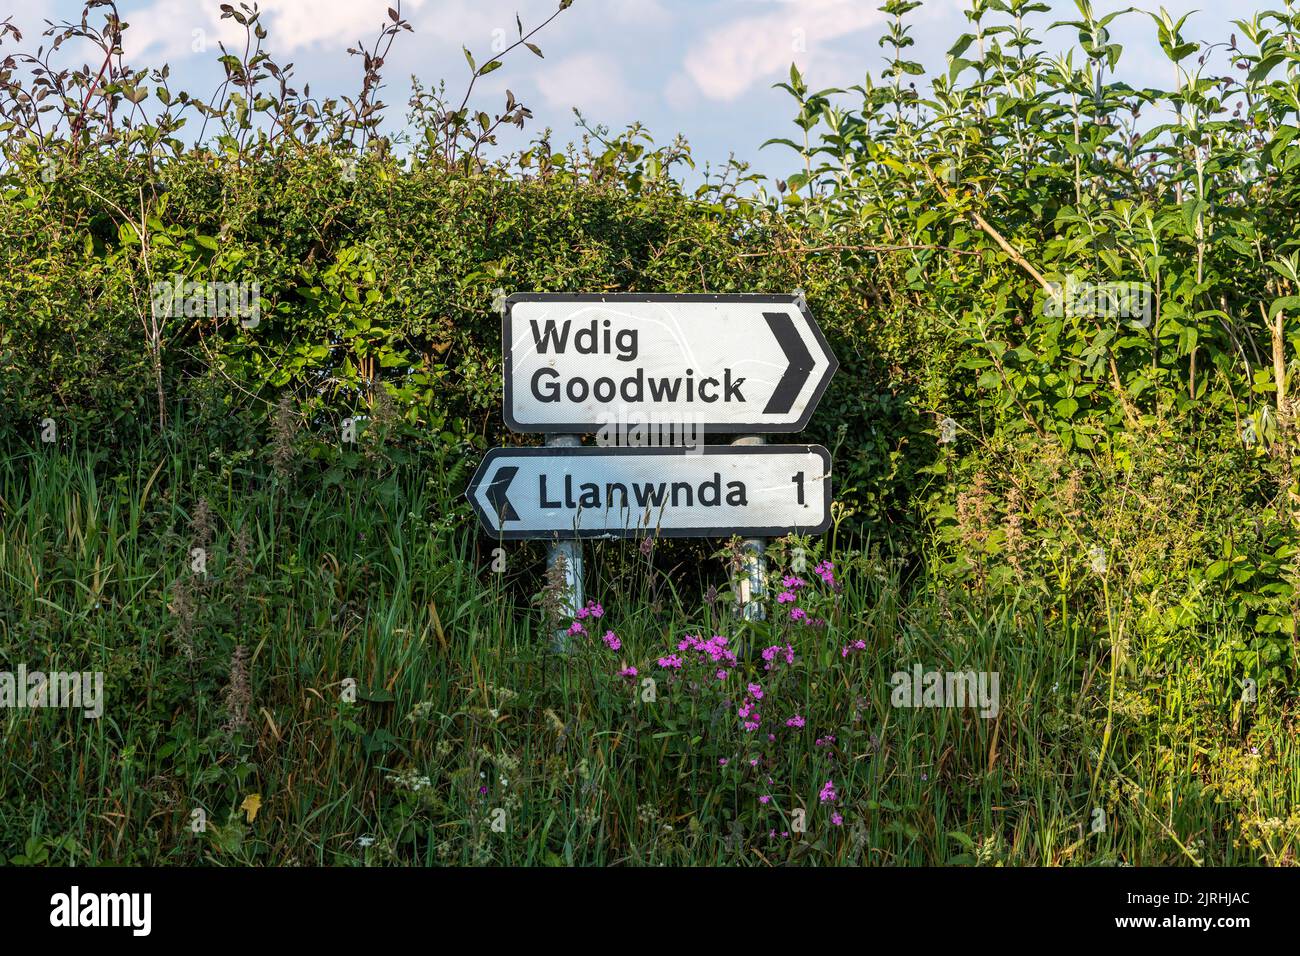 Wdig Goodwick and Llanwnda road sign surrounded by bush plants,  Wales, UK Stock Photo